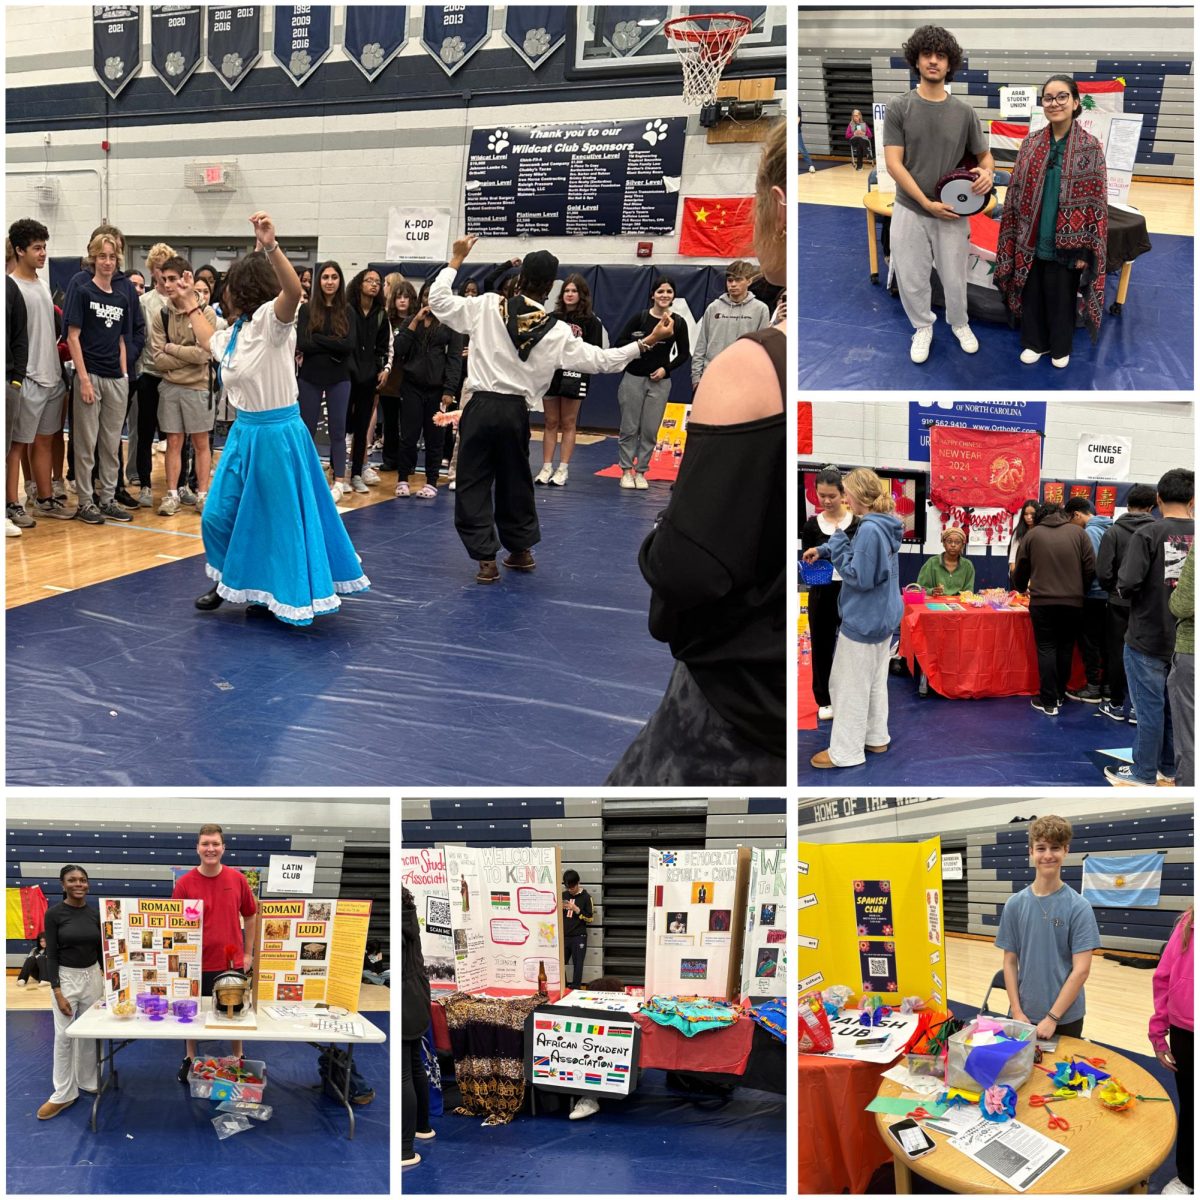 The+annual+International+Fair+was+held+at+Millbrook.+This+fair+helps+students+show+their+cultures%2C+and+for+others+to+learn+more+about+them.+